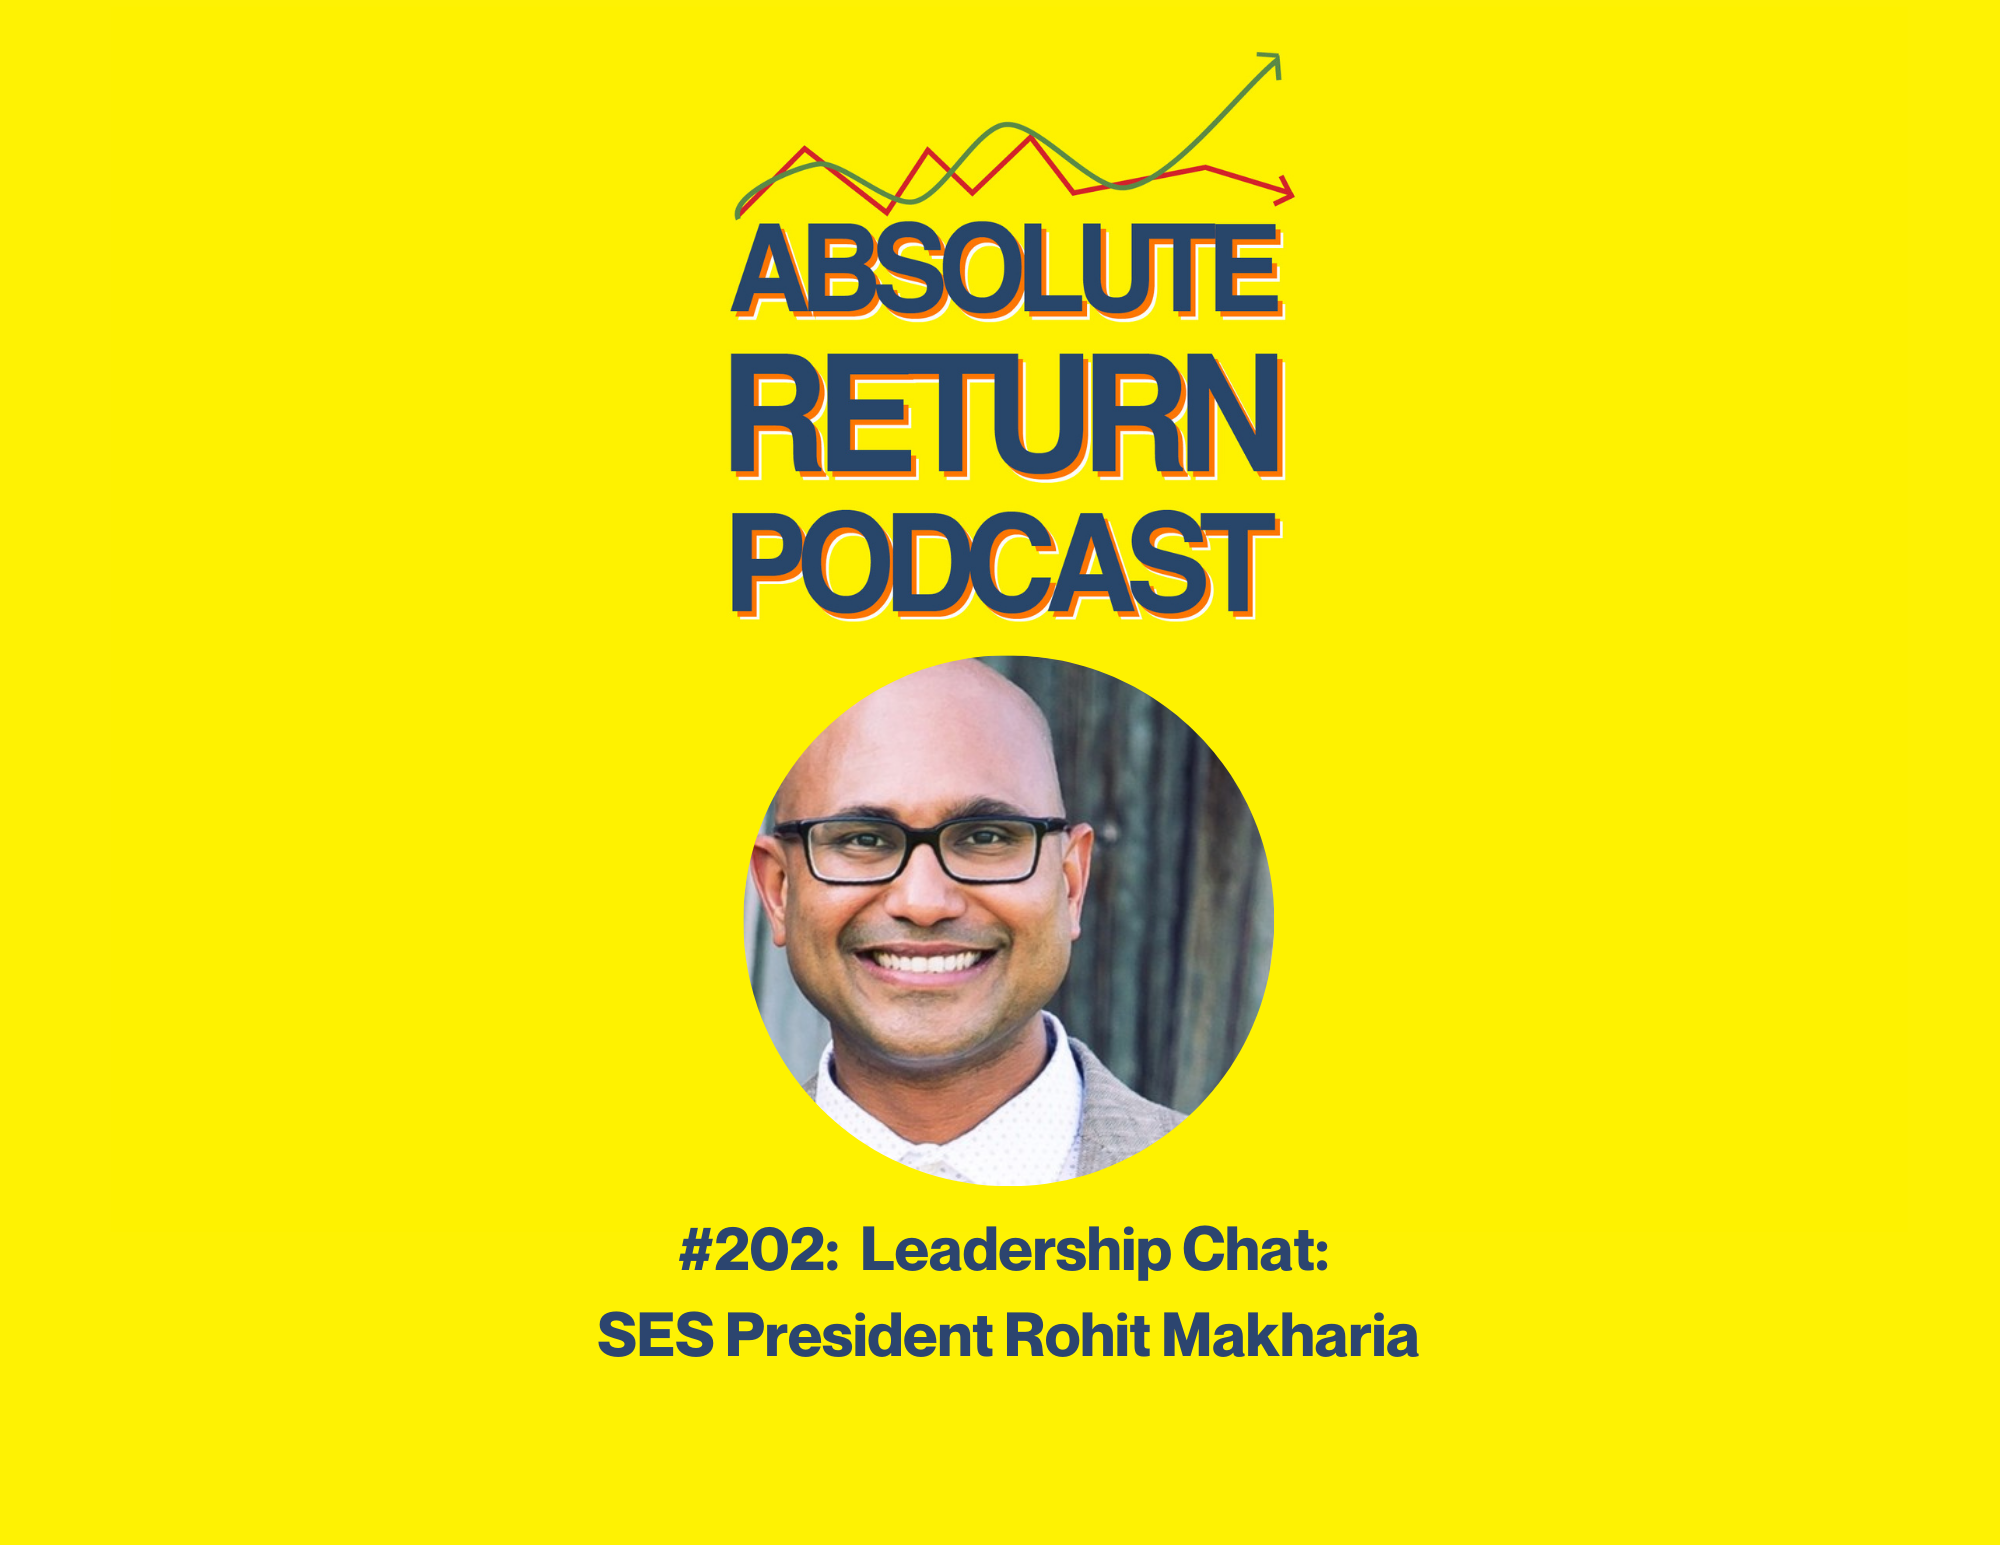 Absolute Return Podcast #202: Leadership Chat: SES President Rohit Makharia